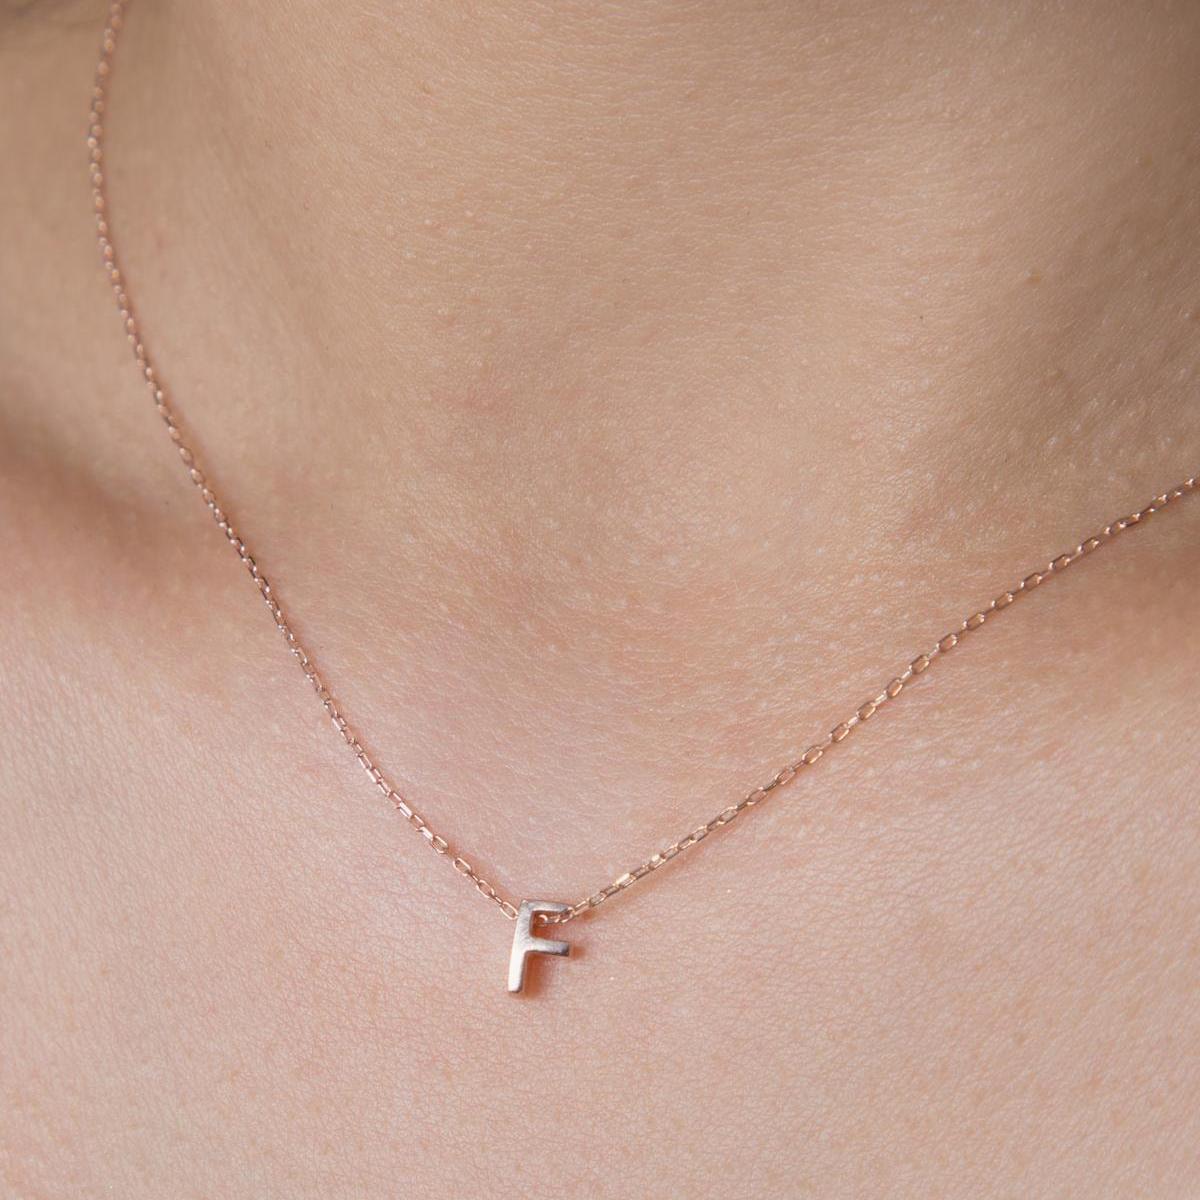 F Initial Necklace Rose • Rose Gold Initial Necklace • Gift For Her - Trending Silver Gifts